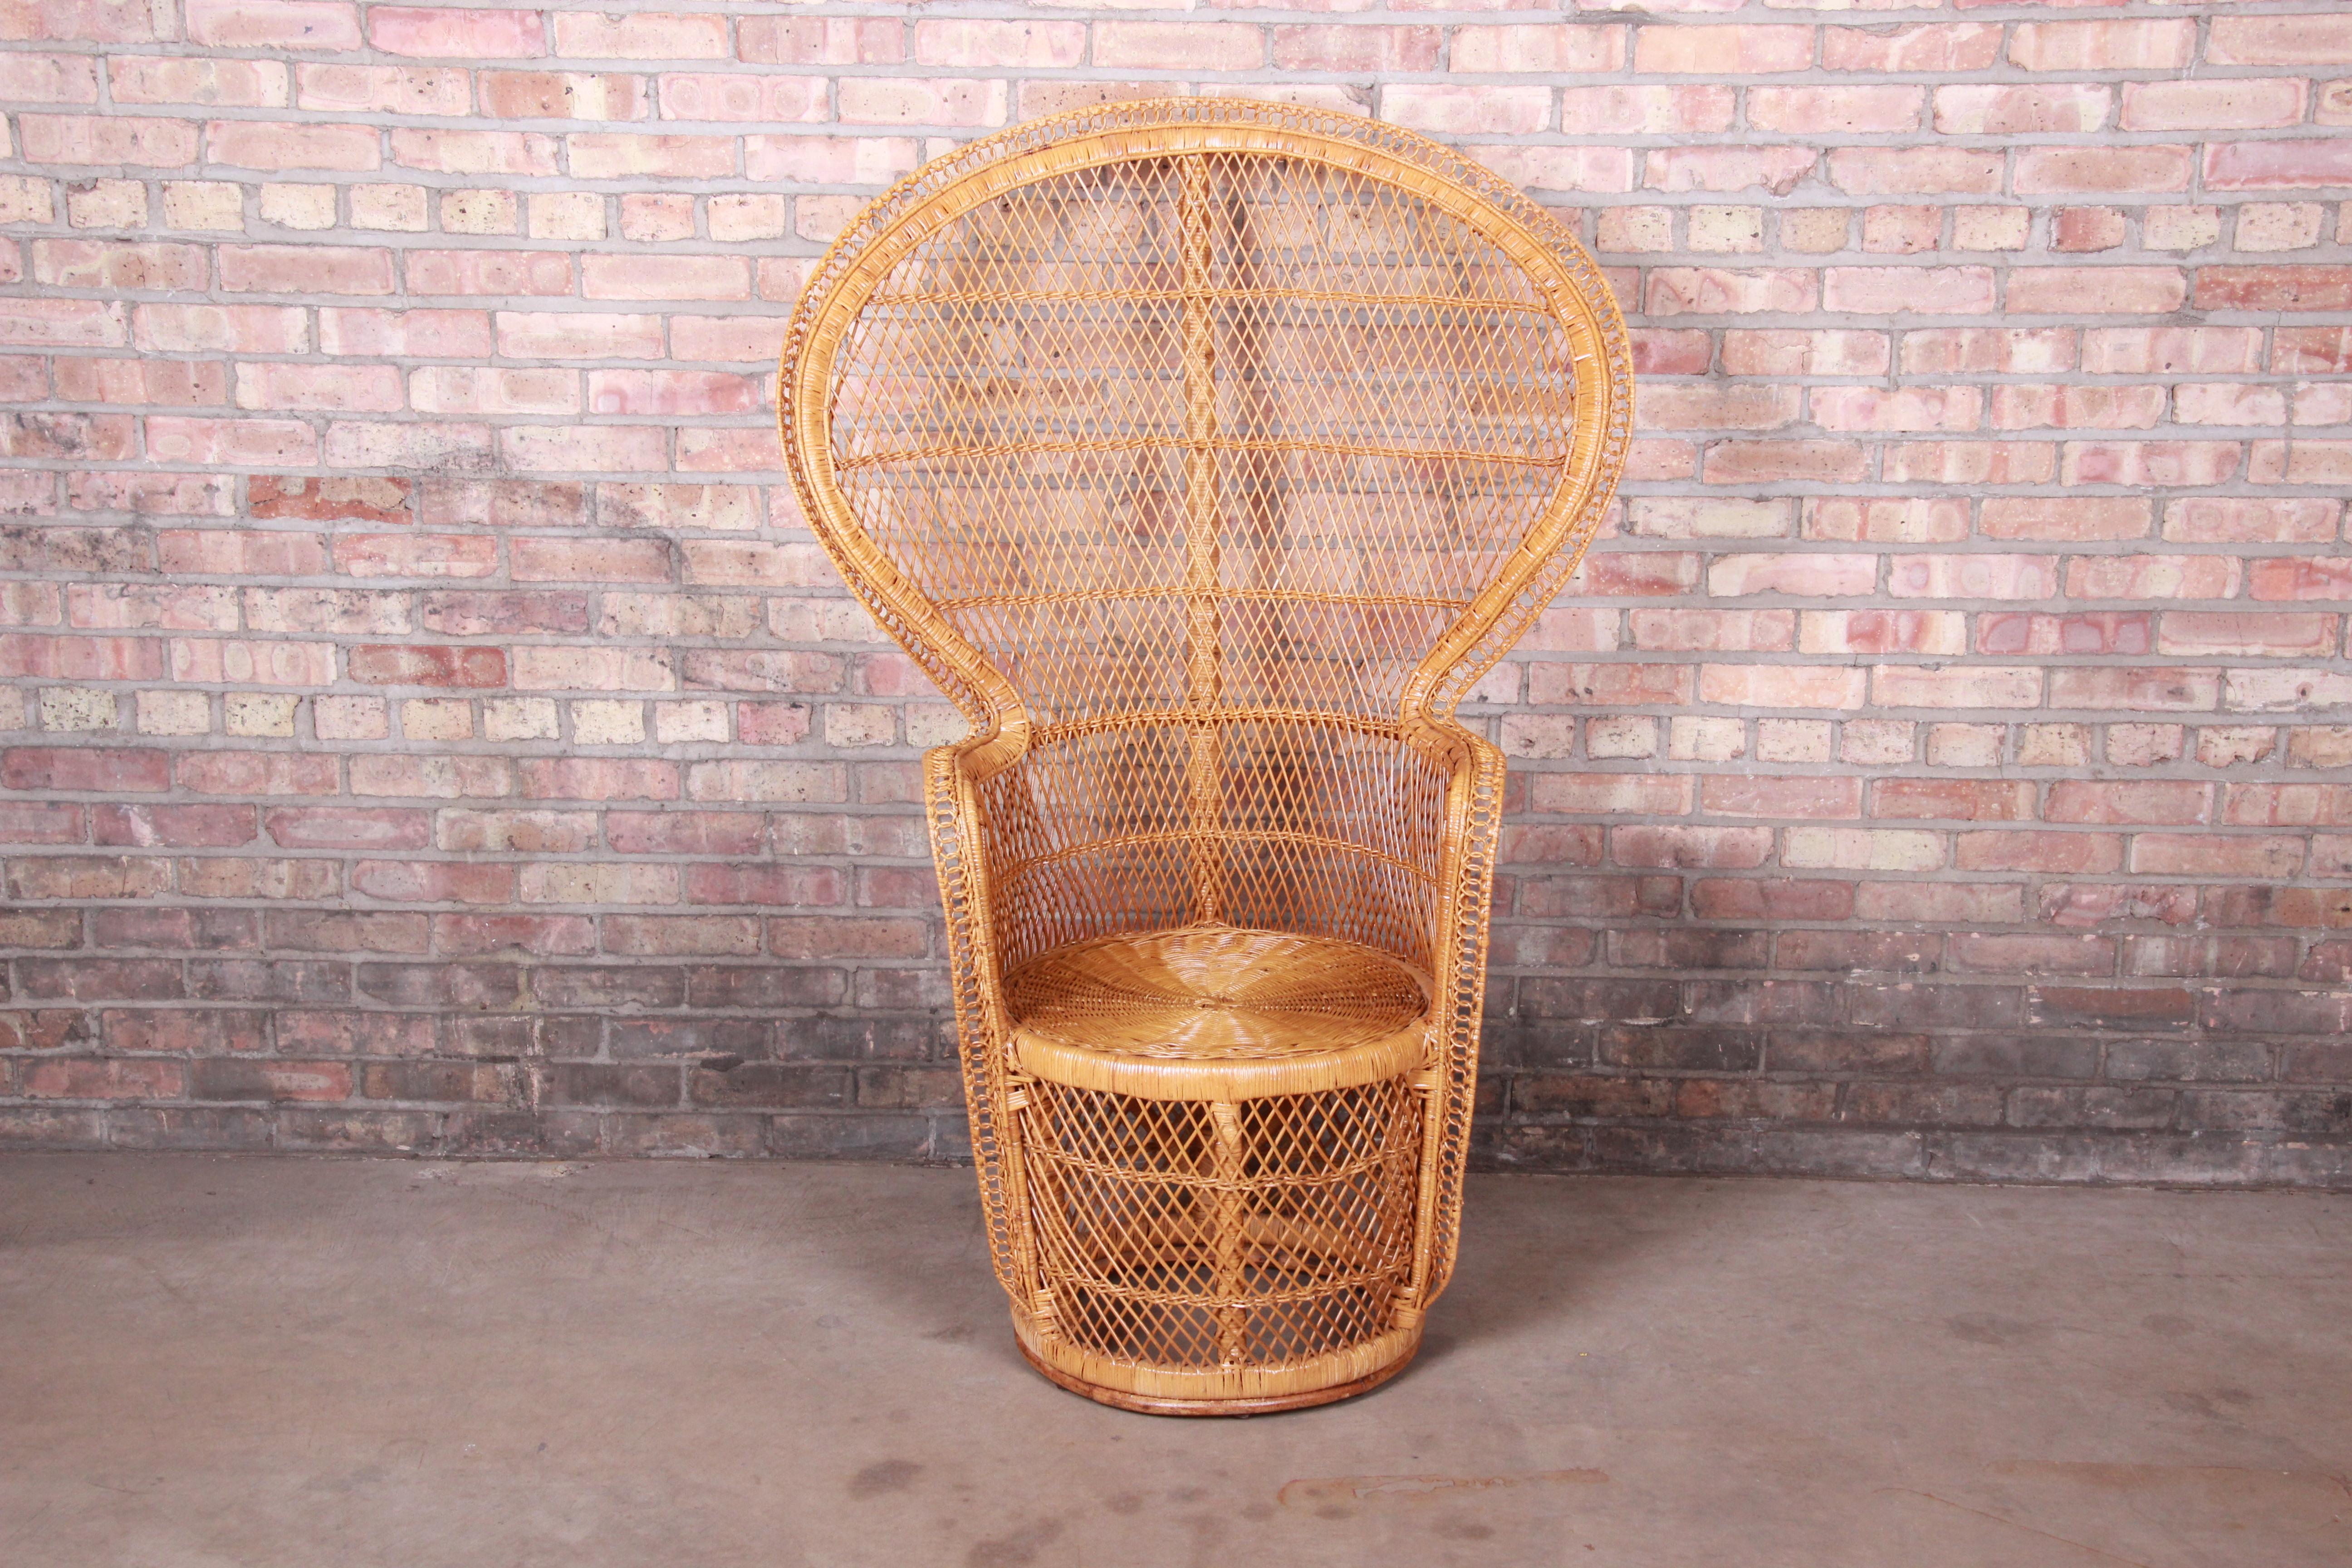 A gorgeous and iconic Mid-Century Modern peacock chair,

circa 1970s

Woven rattan and wicker, with a large scale fan back.

Measures: 36.75